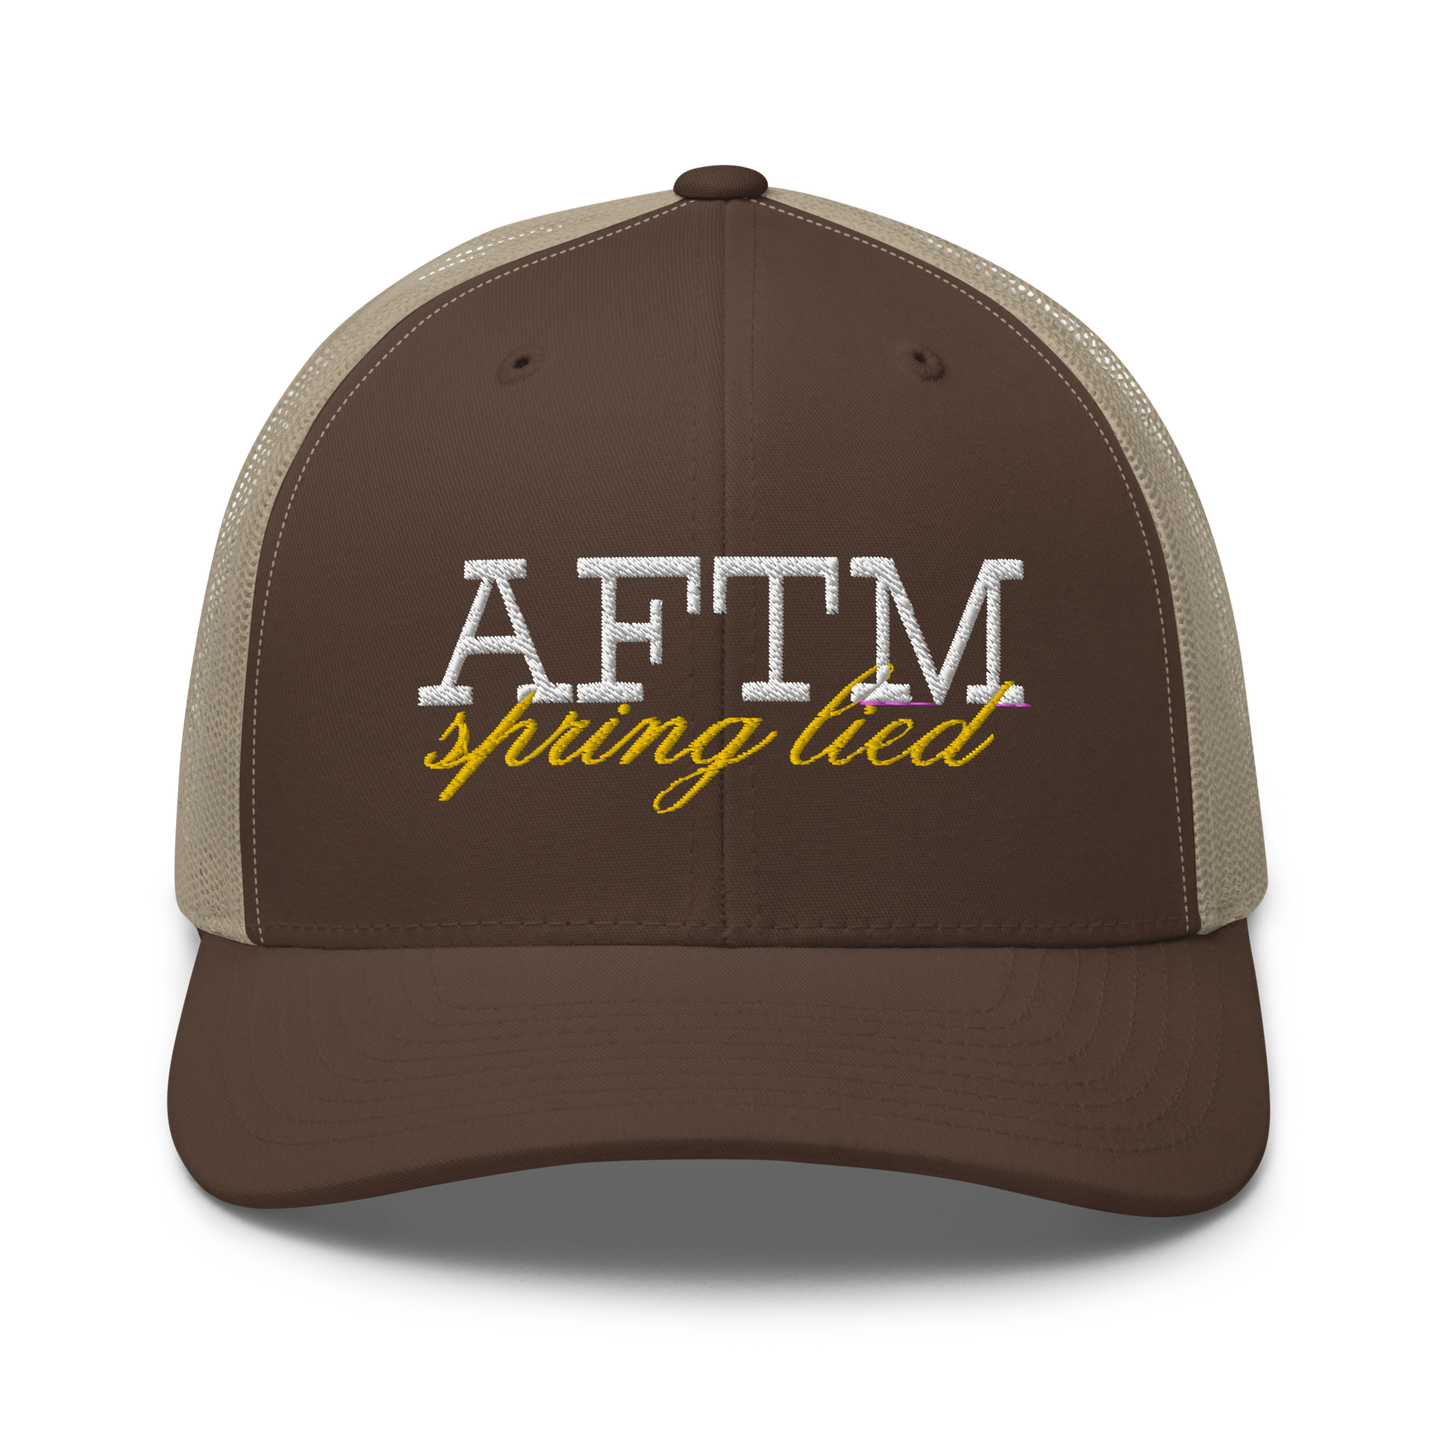 AFTM "Away From The Mire" Trucker Cap | Flat Embroidery | Inspired BMFS Art